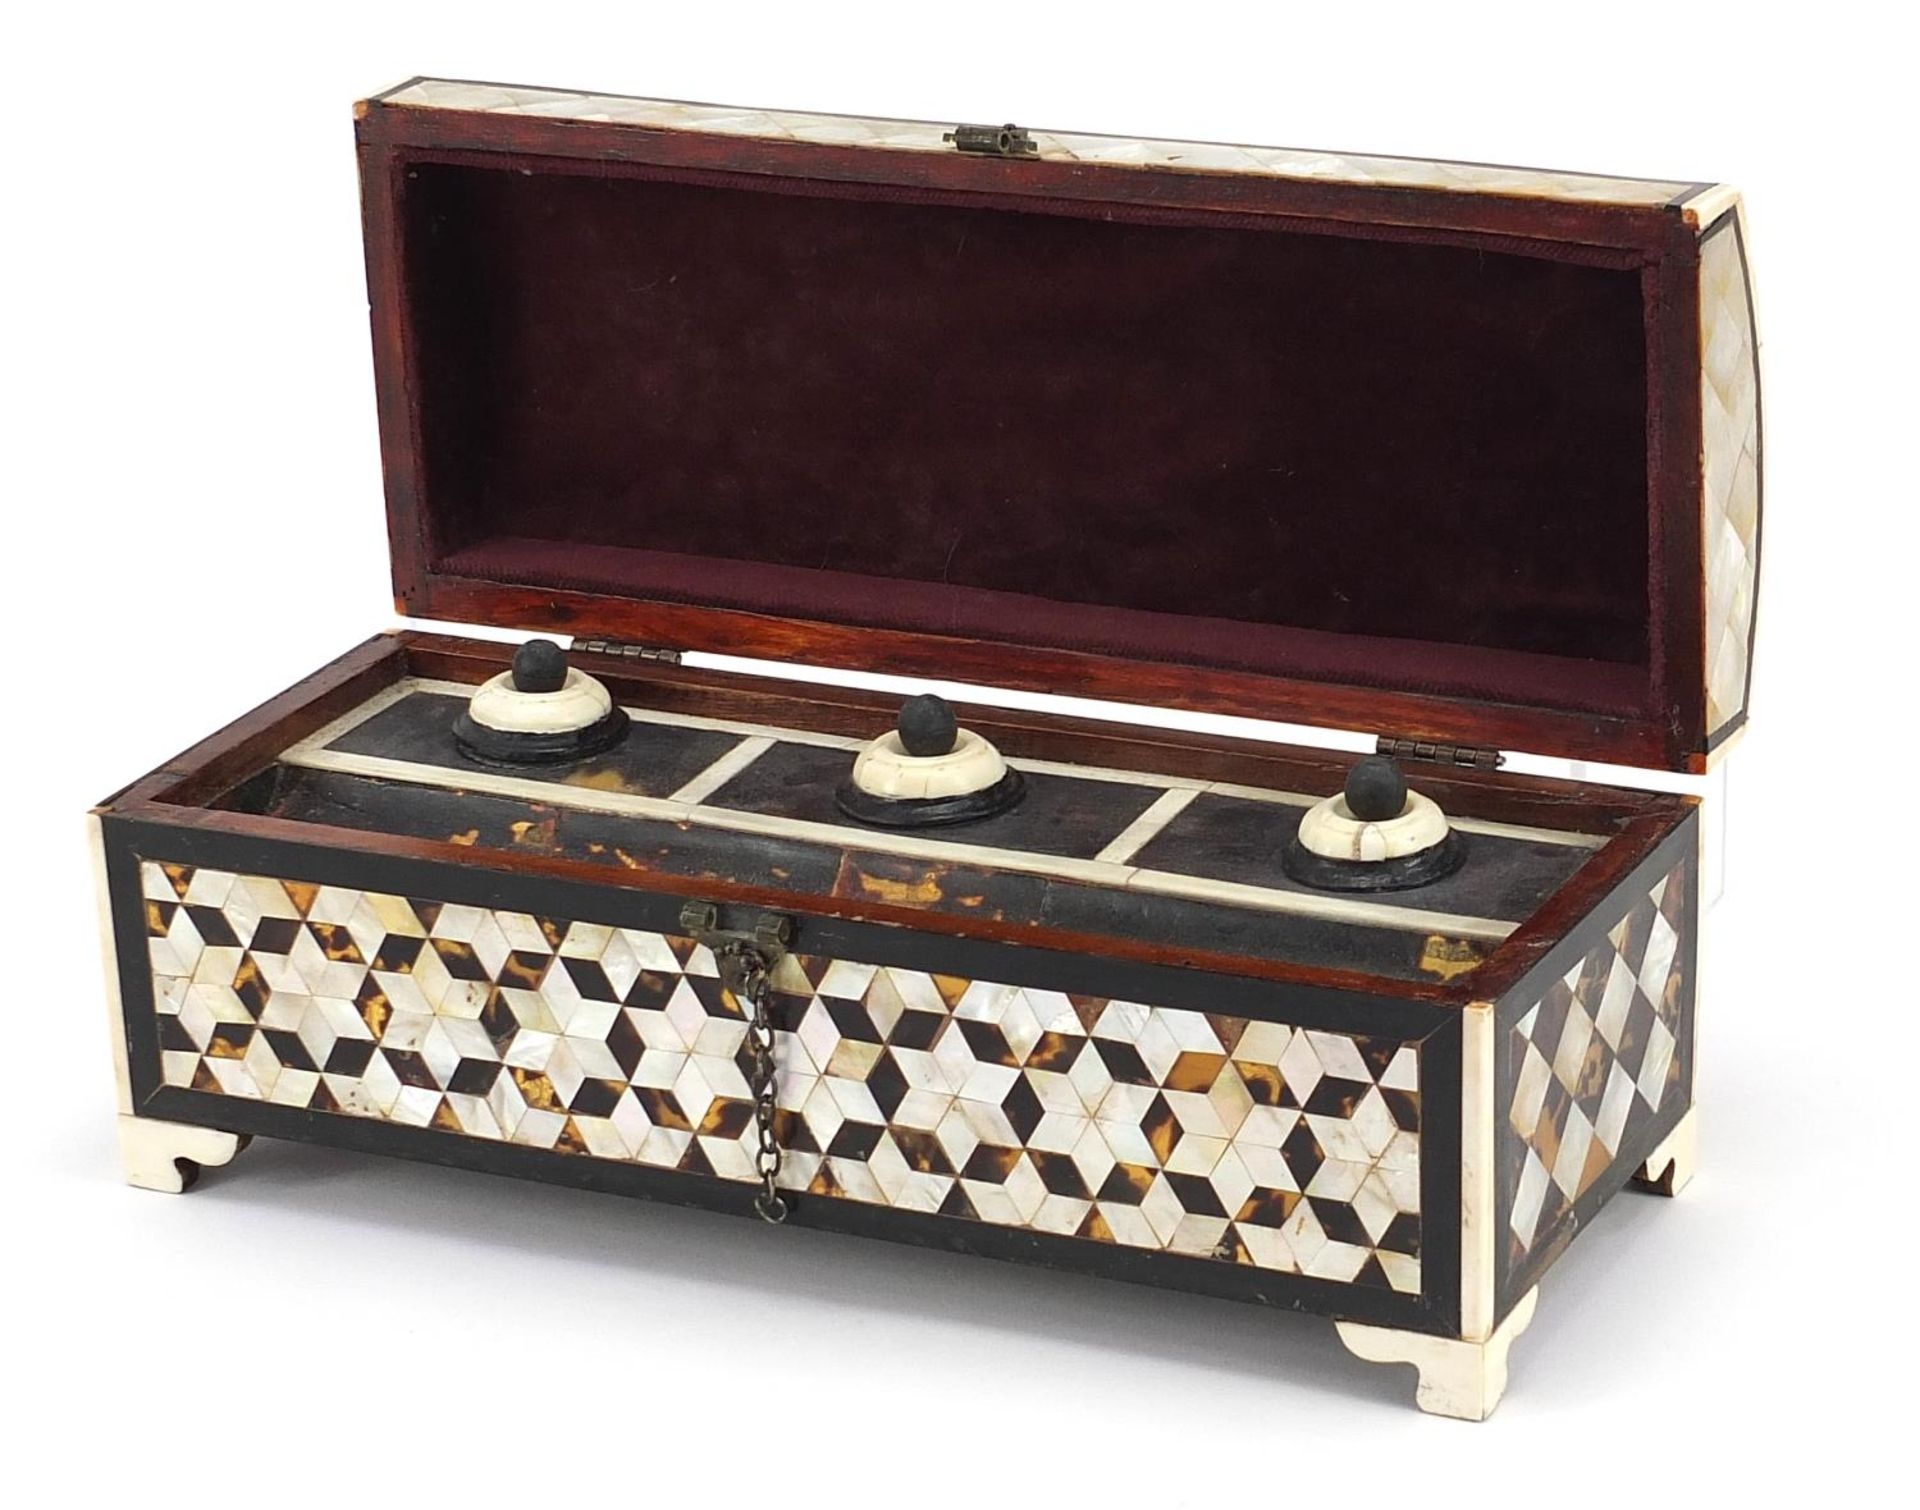 Turkish Islamic mother of pearl and tortoiseshell pen box, 11cm H x 32cm W x 12cm D - Image 2 of 4